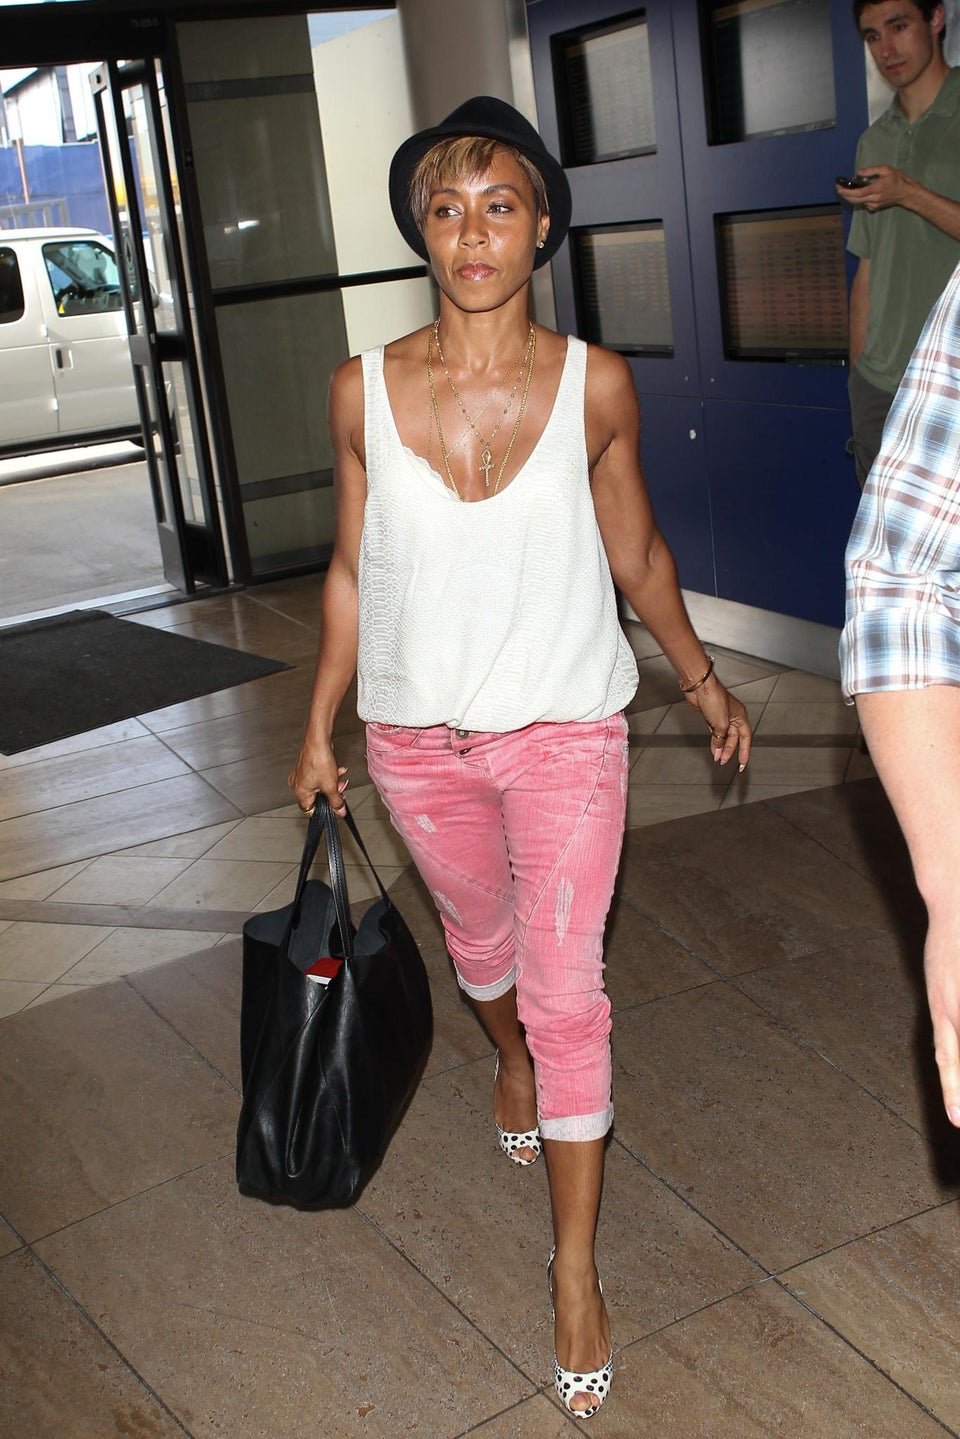 Jada Pinkett Smith Changes Her Look With a Pixie Cut